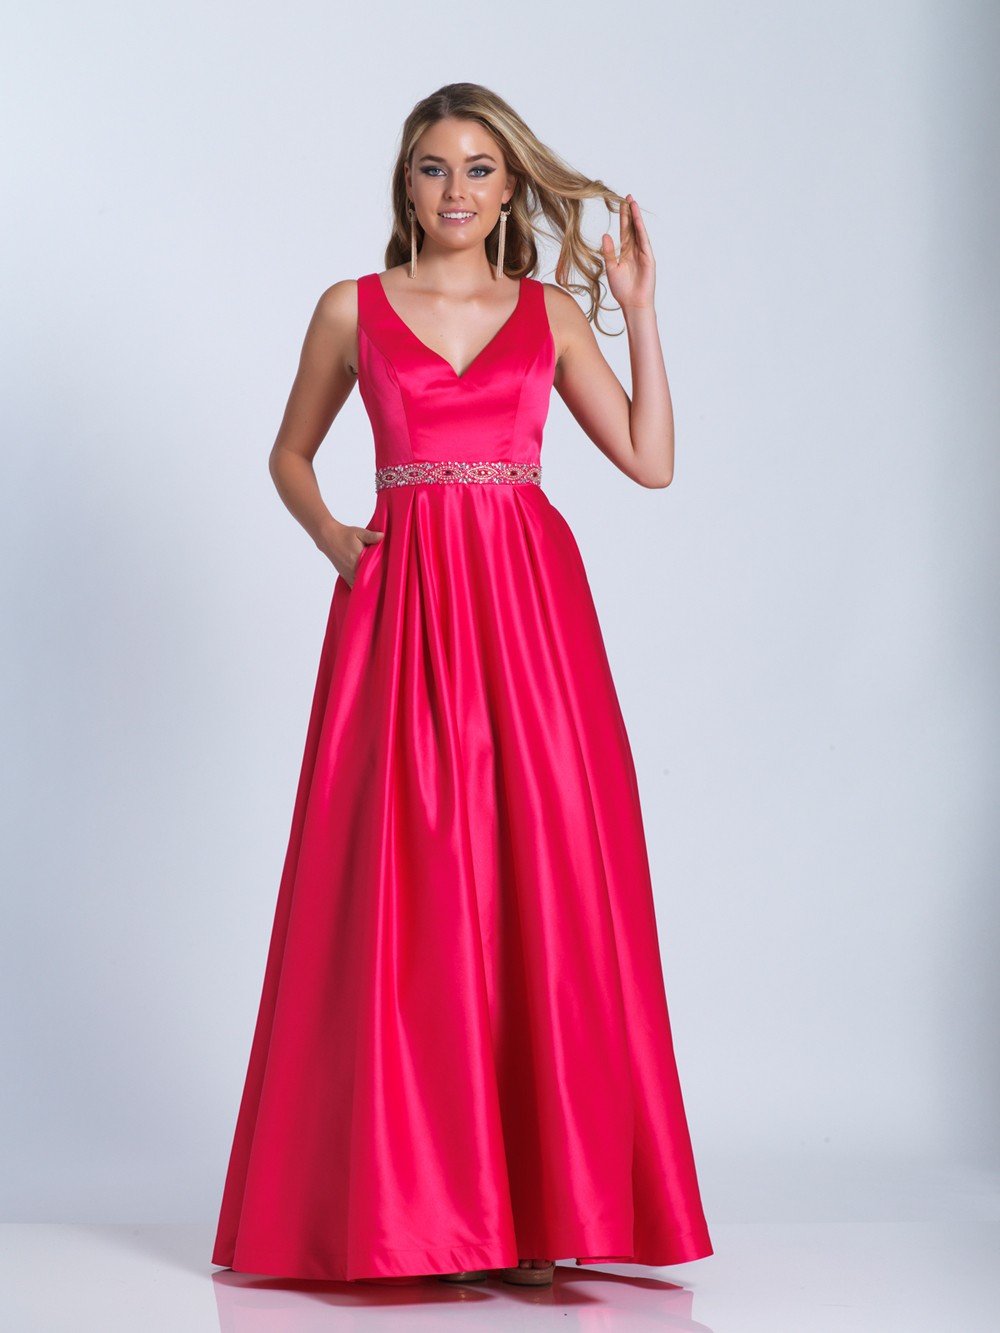 Dave & Johnny - Sleeveless Embellished Waist A-Line Gown 3530  in Pink